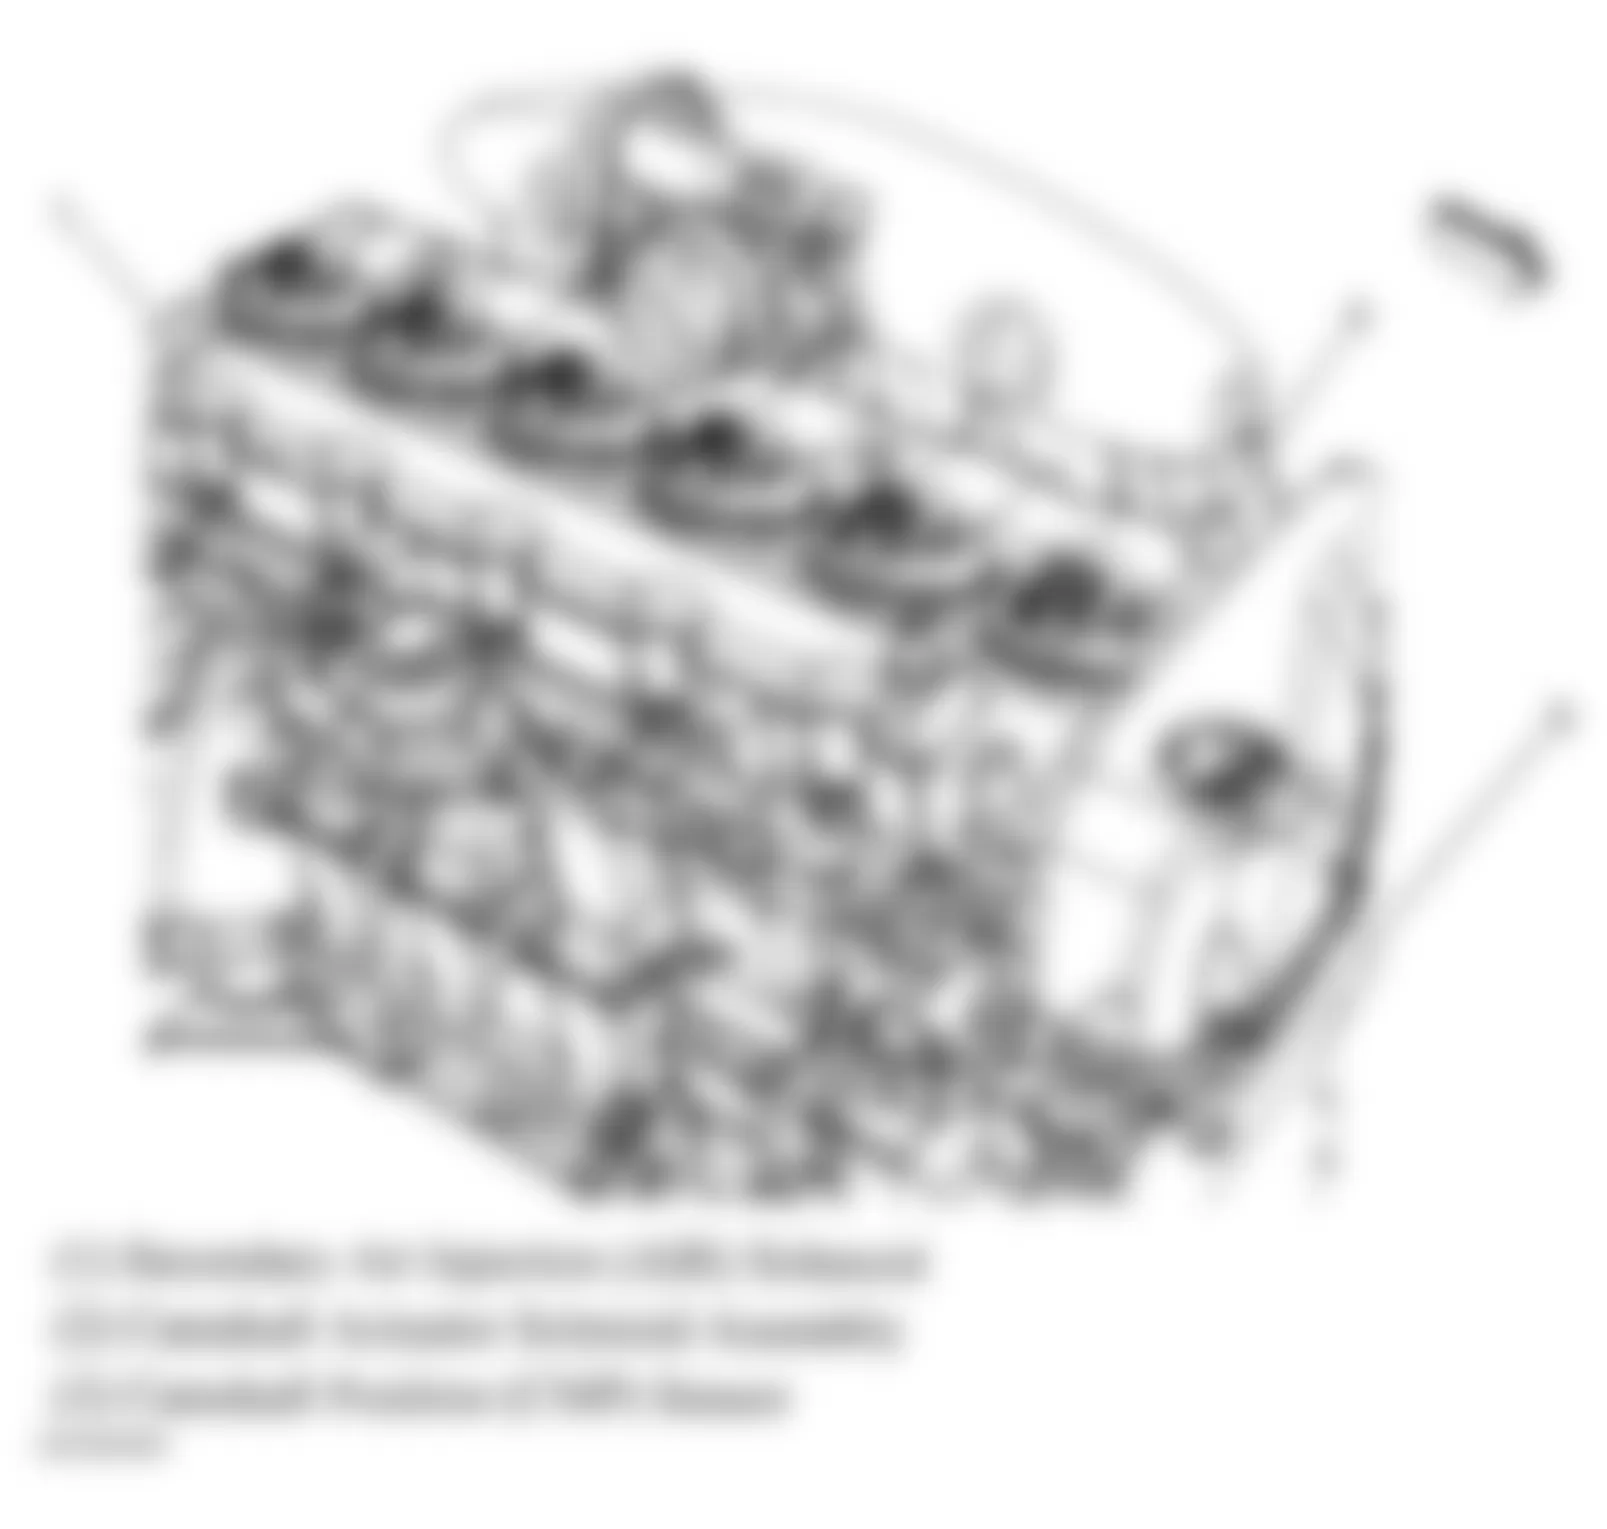 GMC Envoy XL 2005 - Component Locations -  Upper Right Side Of Engine (4.2L)